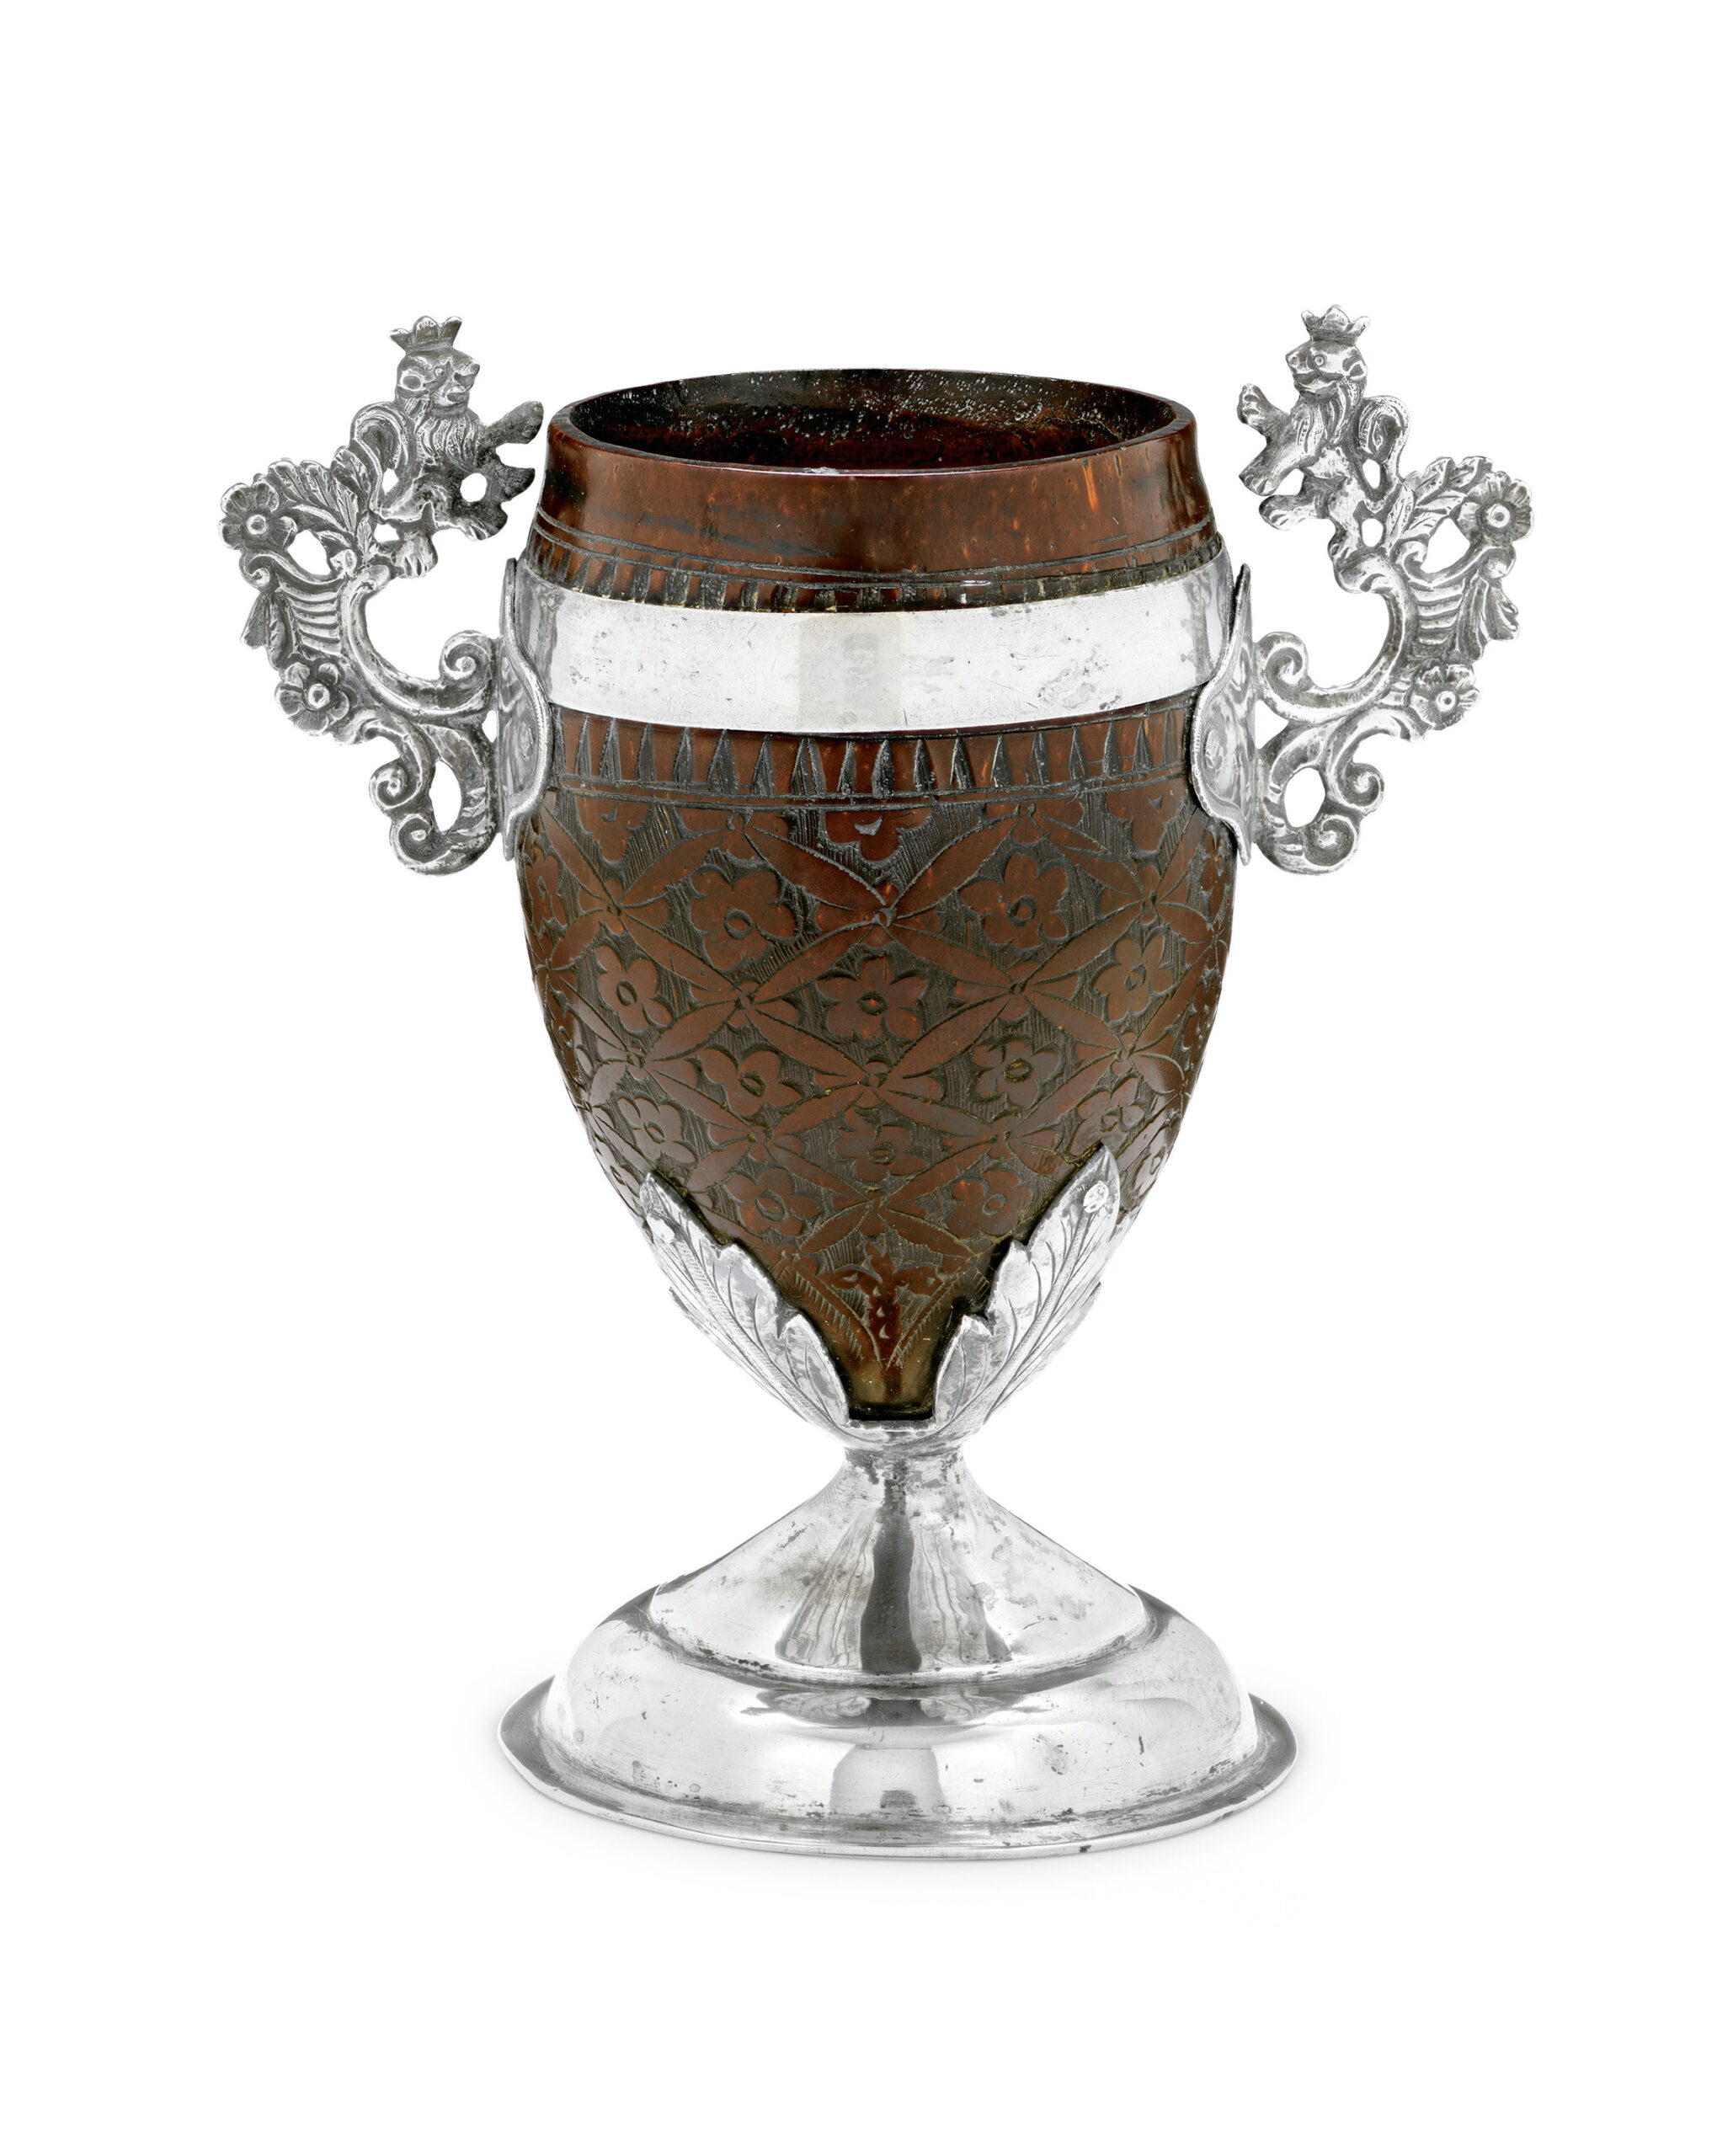 Decorative cup made of carved coconut shell with flowers and a silver base with ornate side decoration